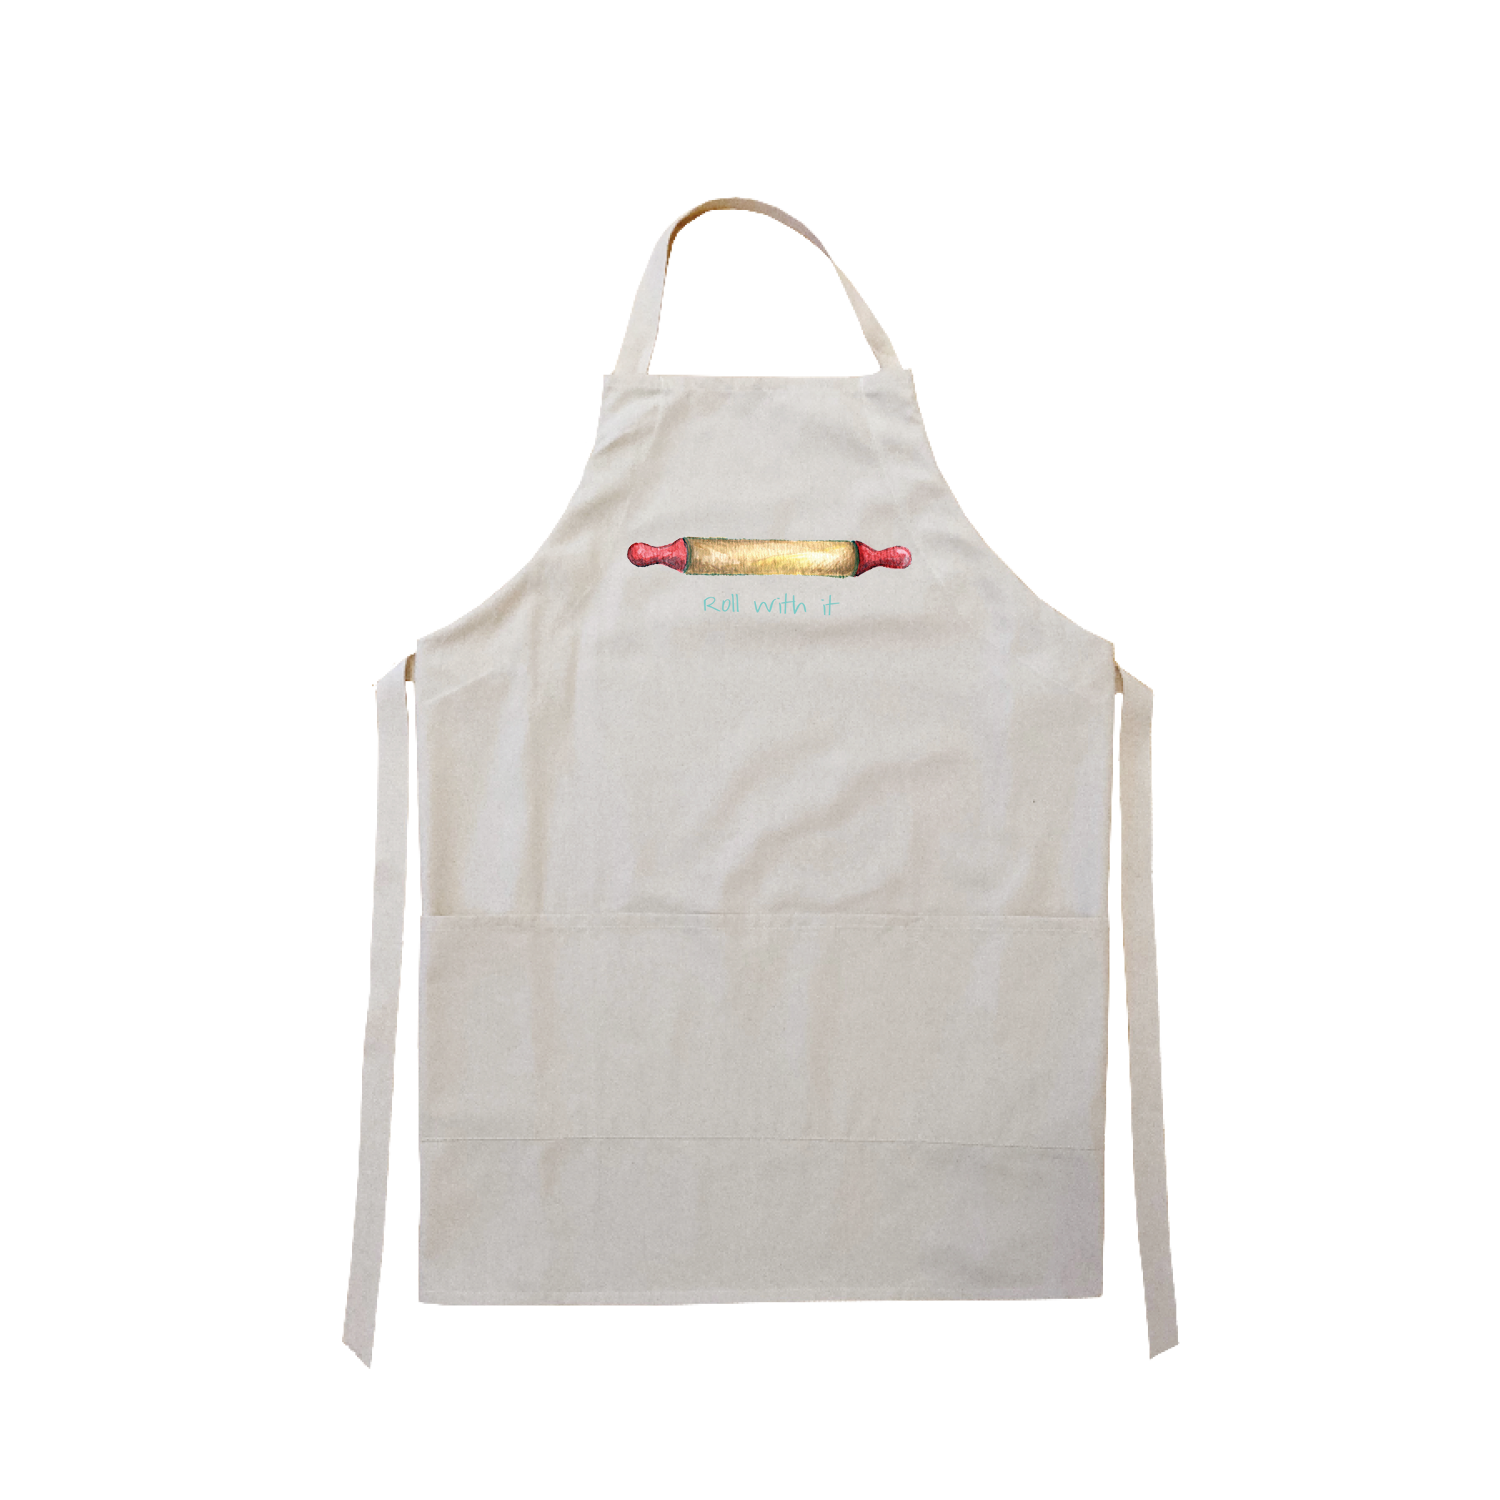 roll with it apron